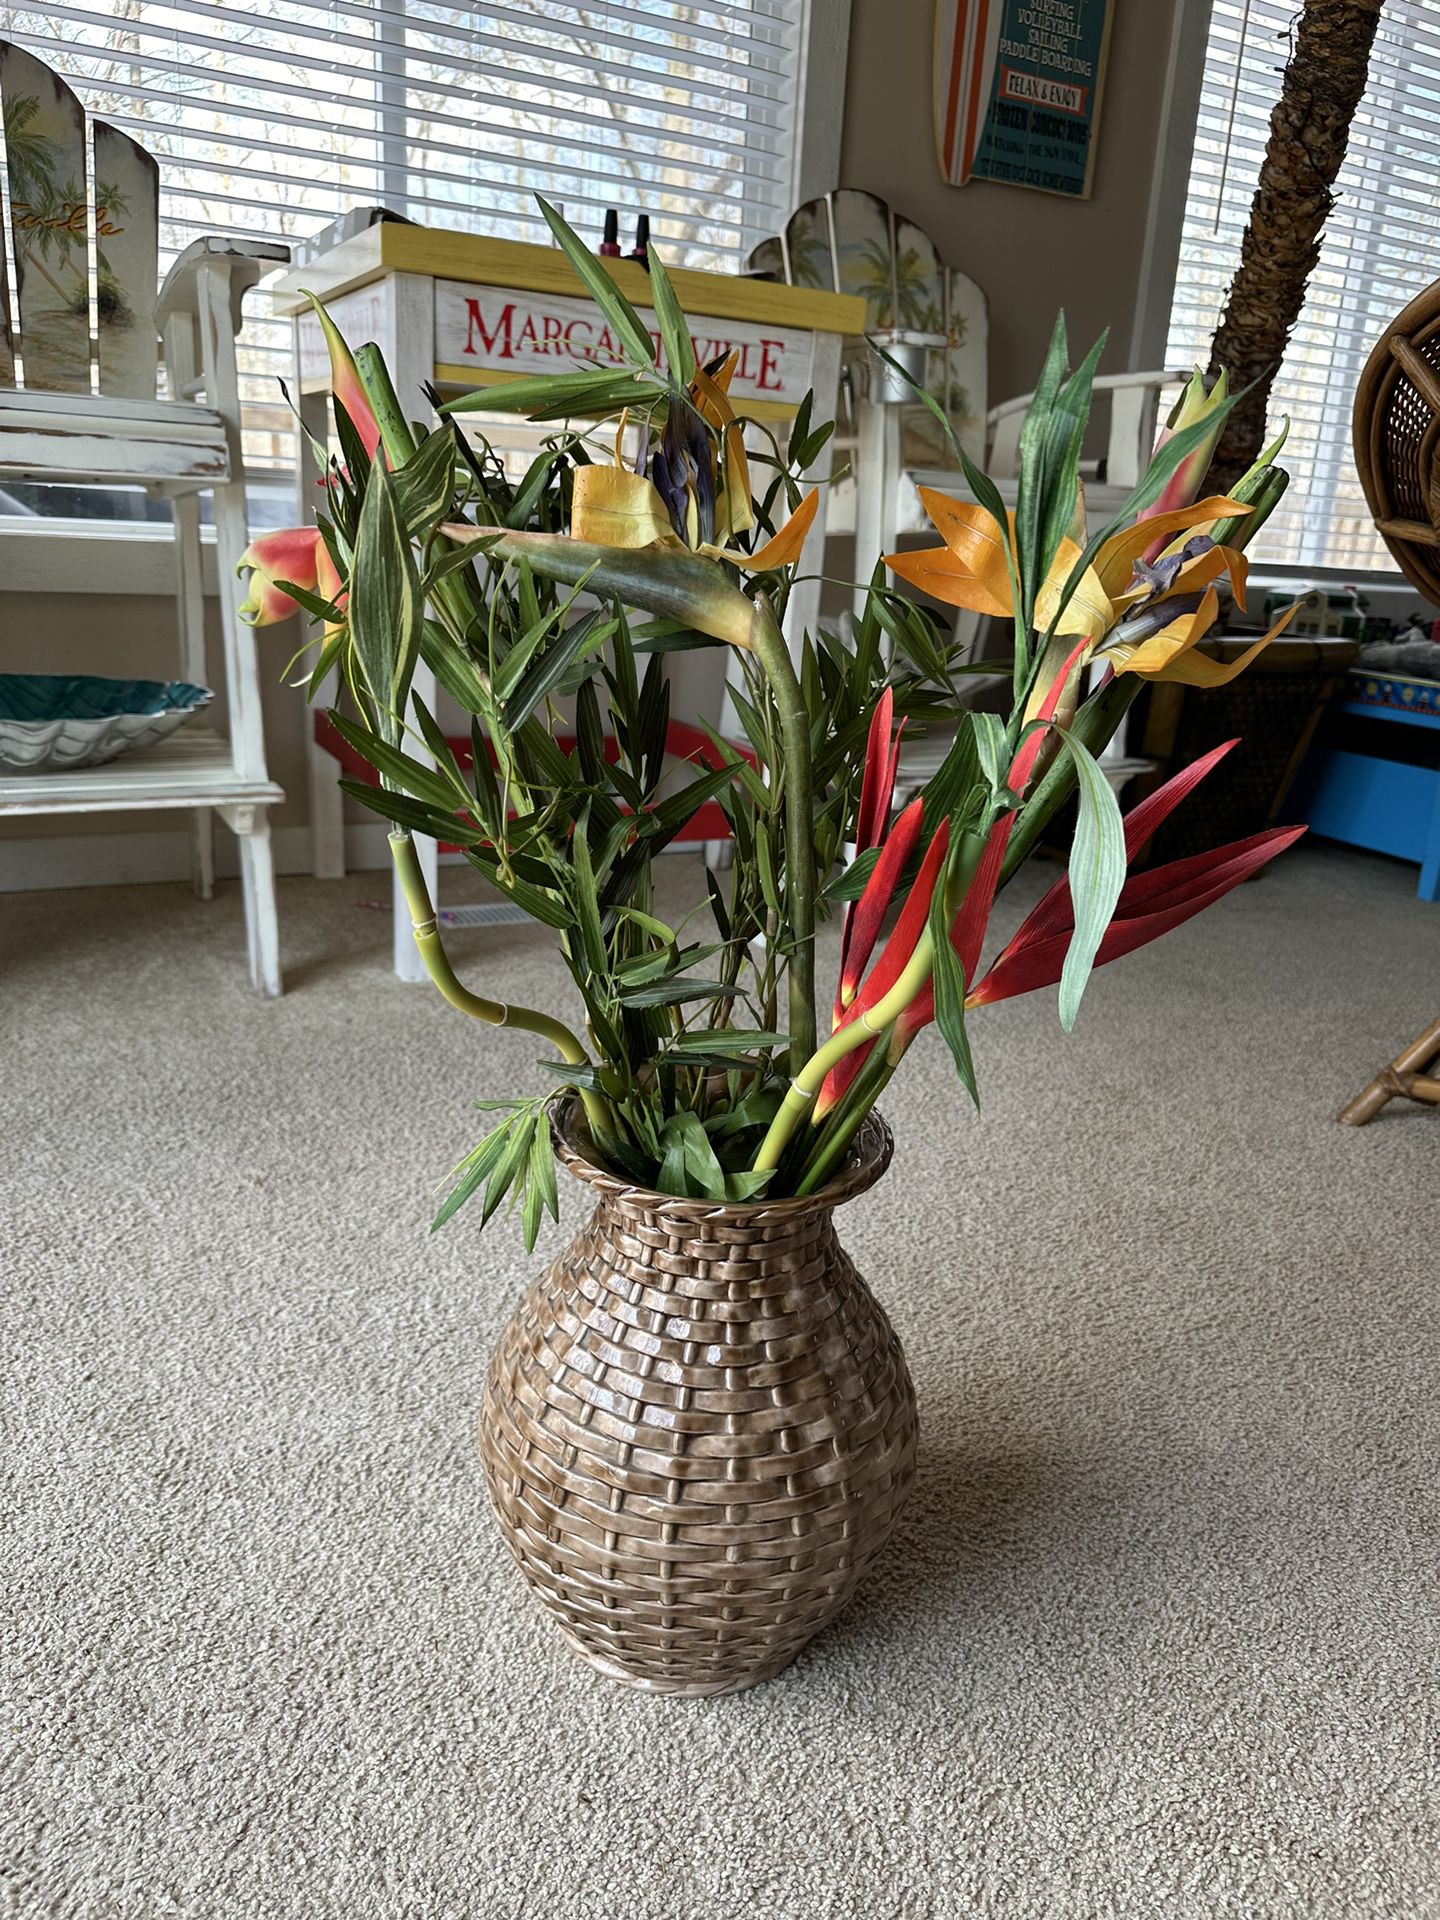 Wicker Ceramic Vase with Bird of Paradise Flowers apprx. 33” Tall